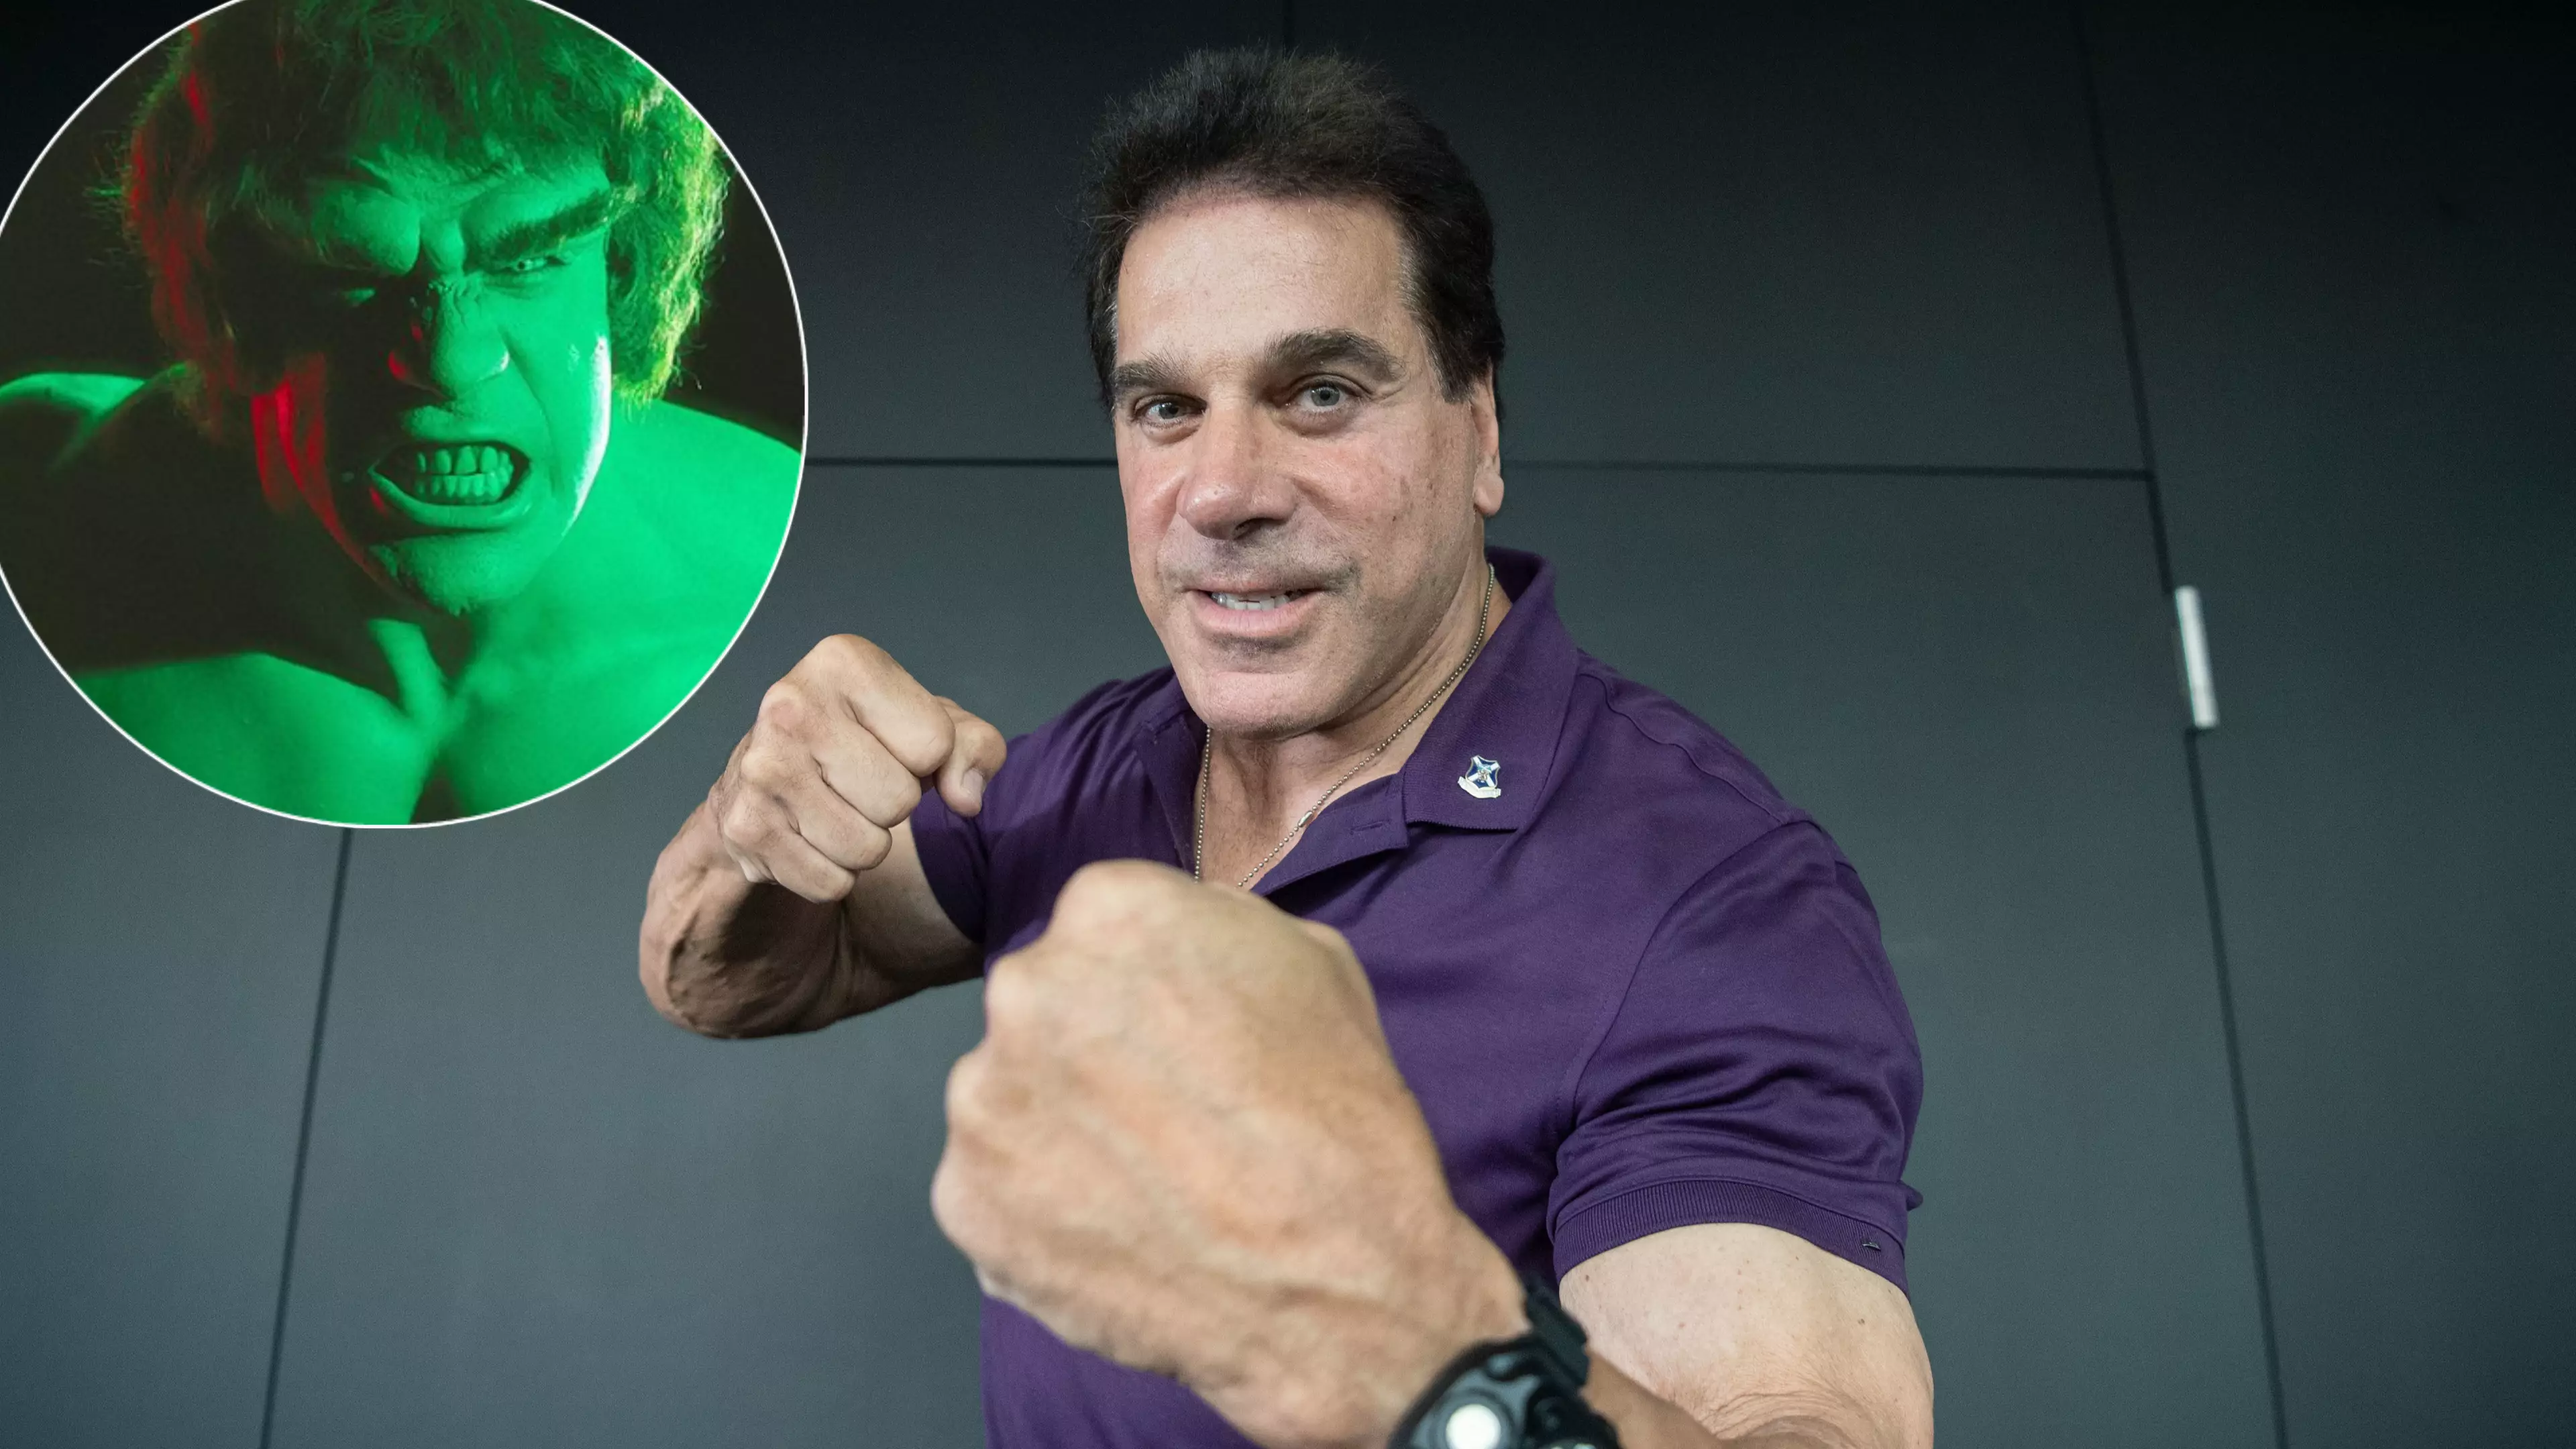 Incredible Hulk Actor Lou Ferrigno Is Now Real Life Sheriff's Deputy